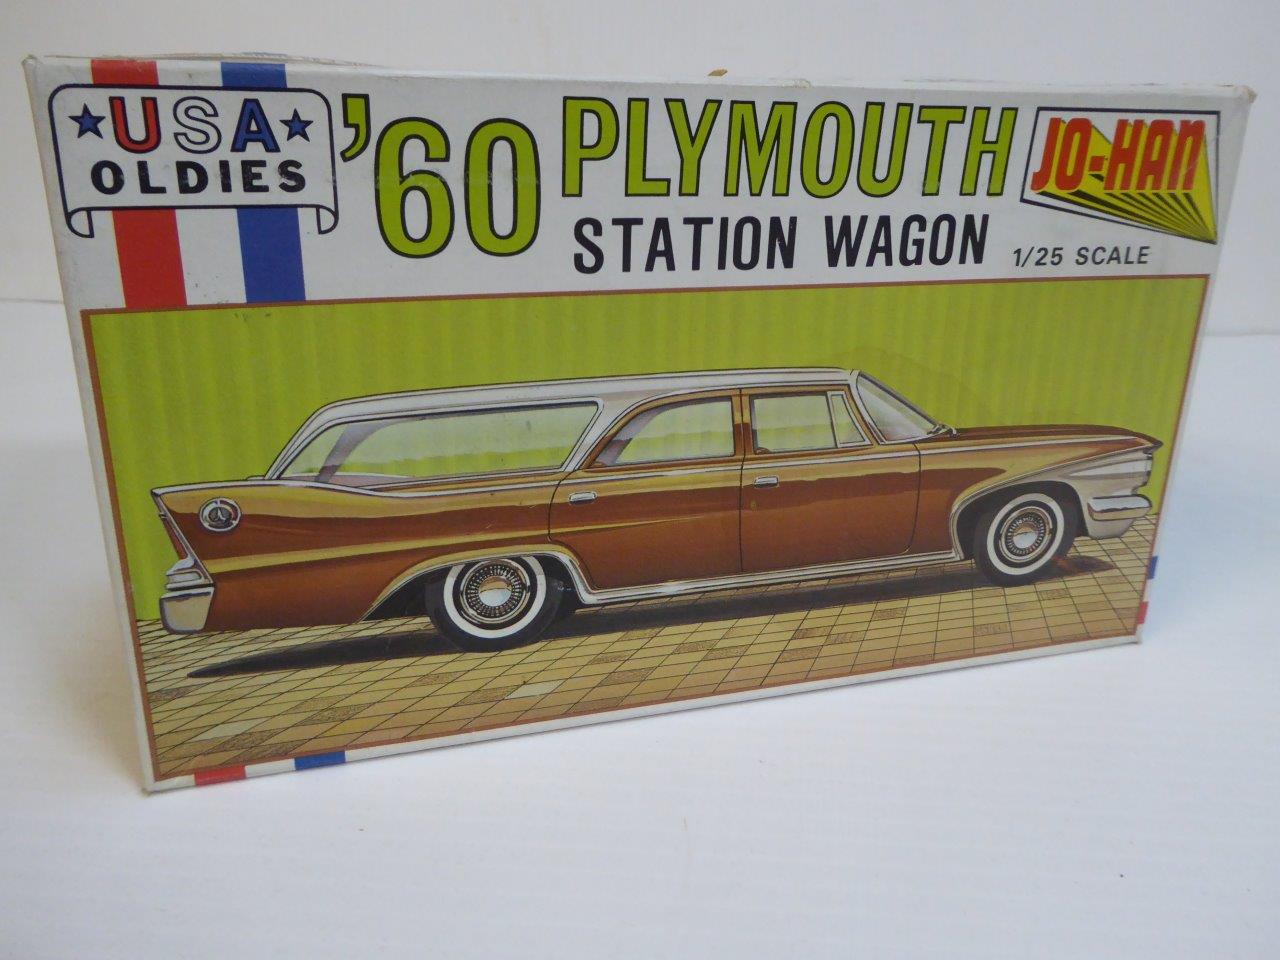 60s Plymouth Station Wagon by Jo-Han